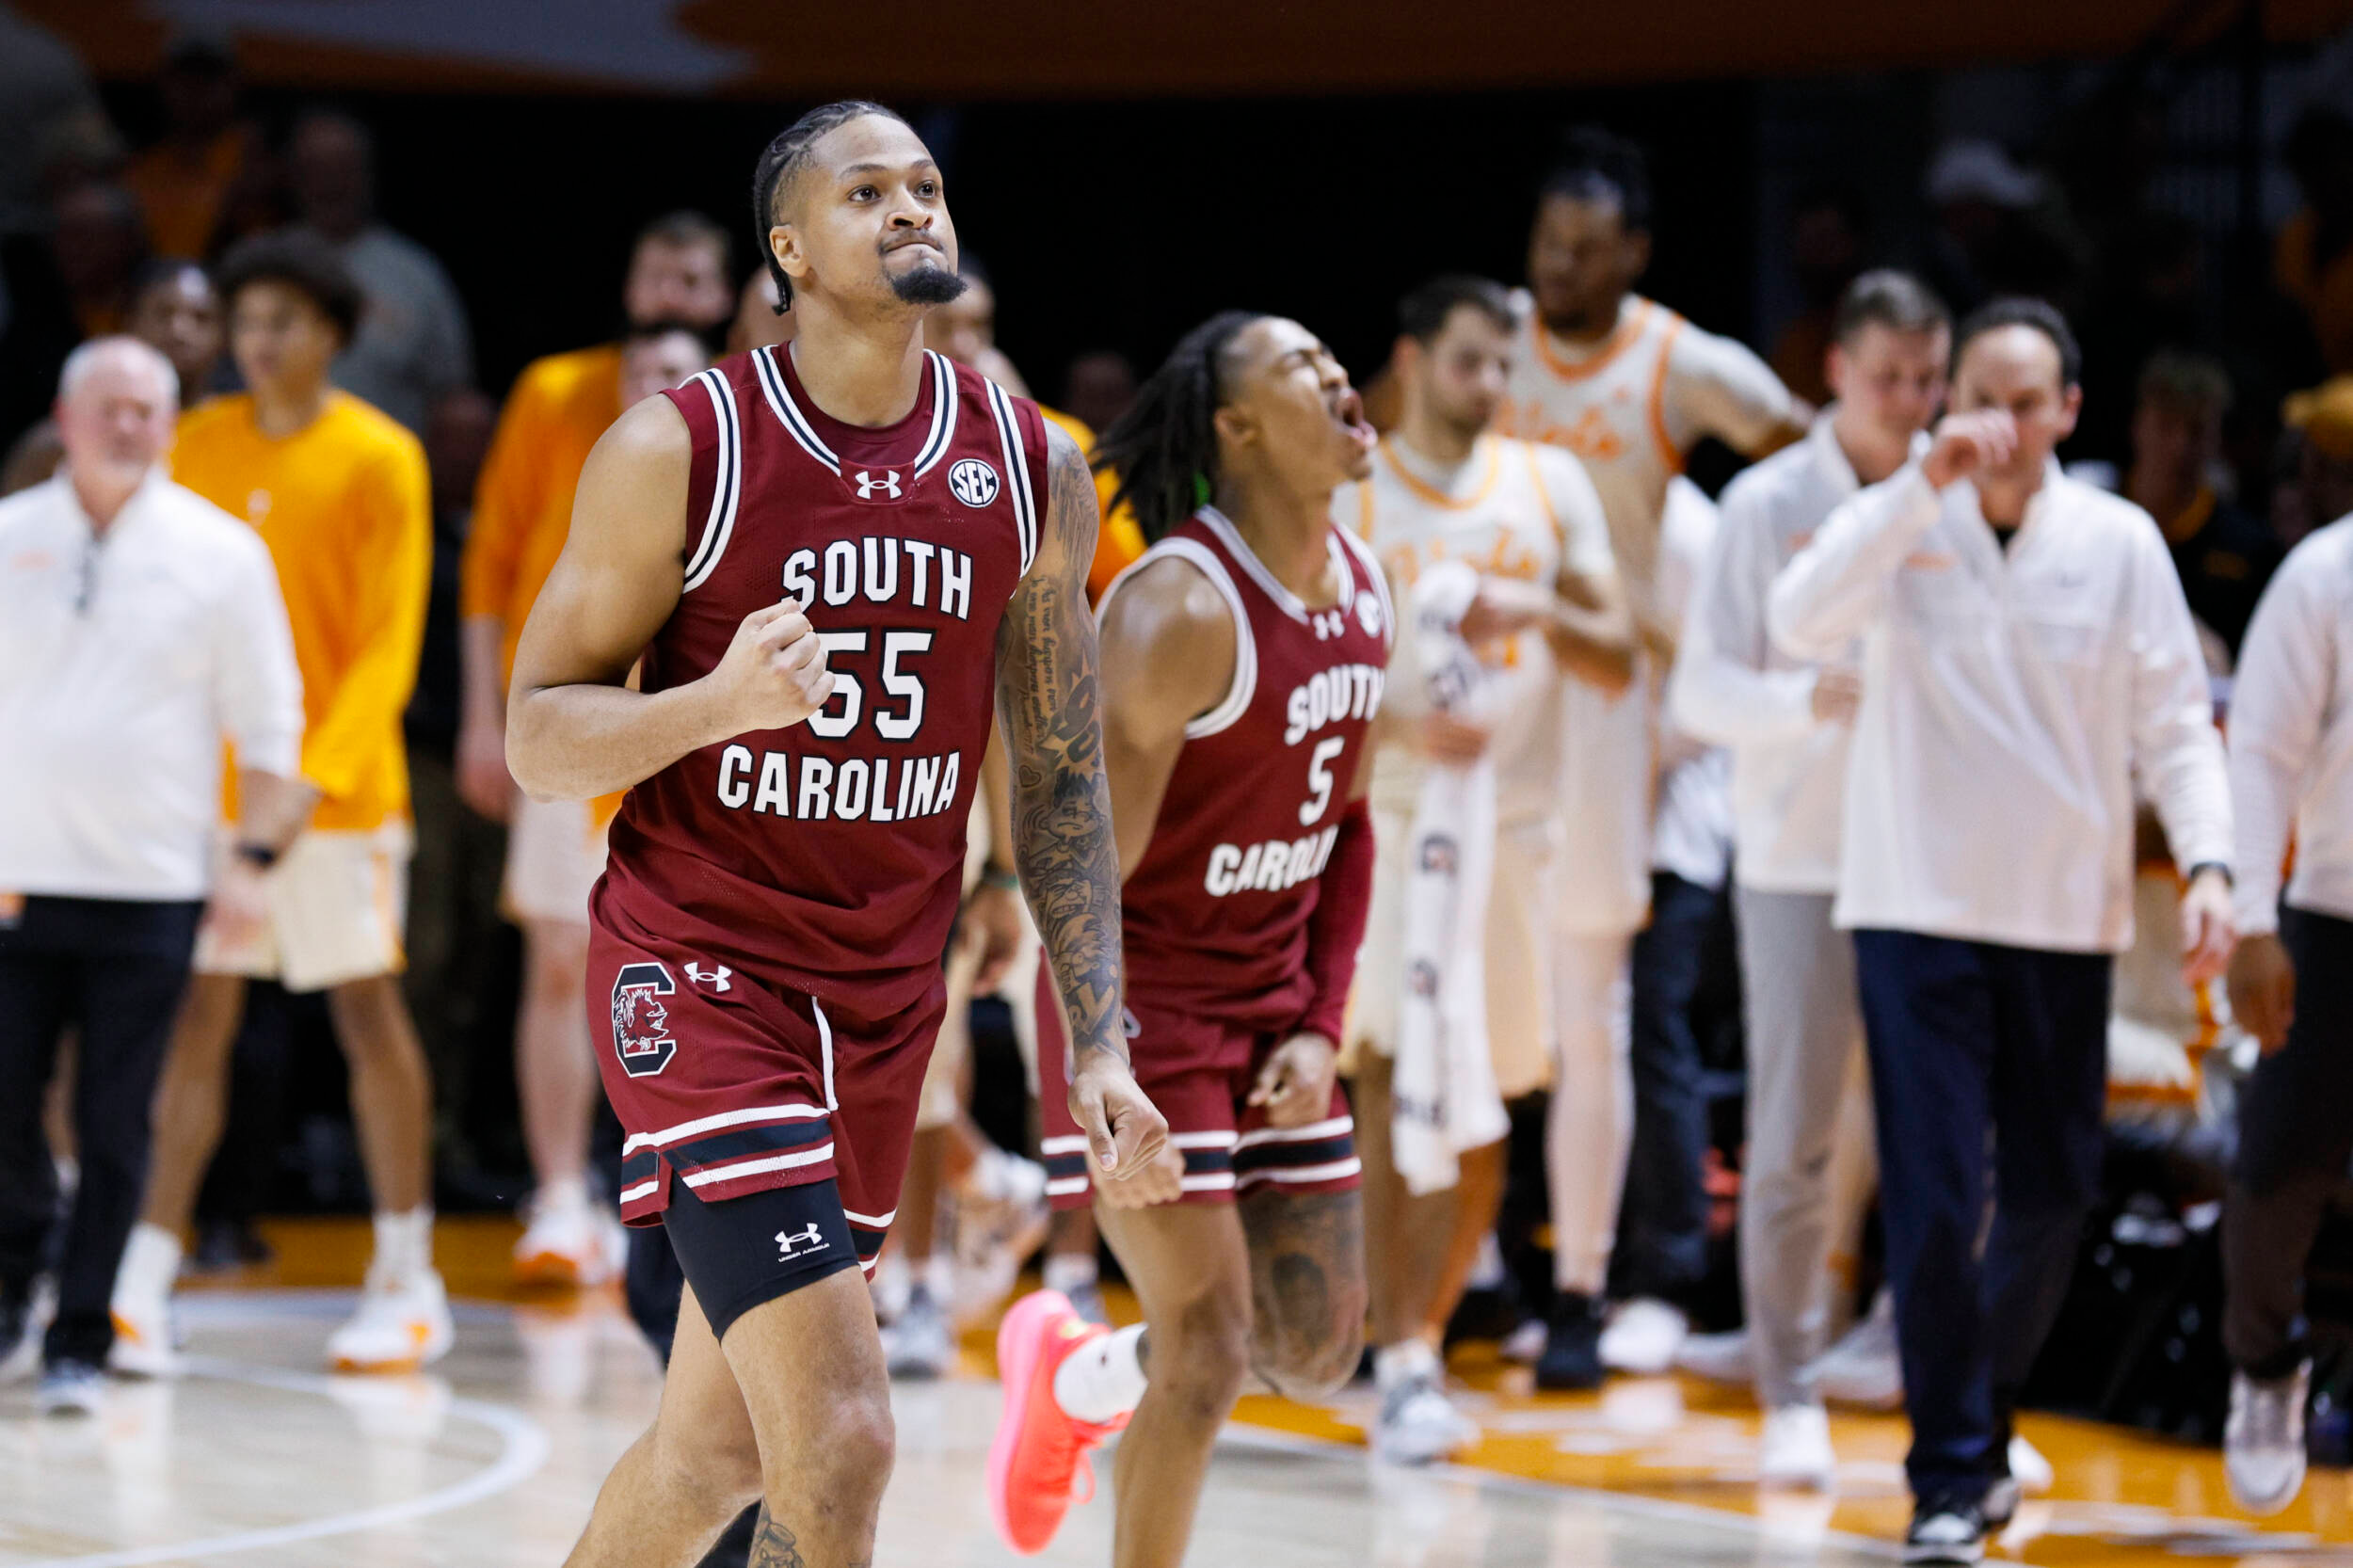 Cooper and Mack lead the way as South Carolina upsets No. 5 Tennessee, 63-59